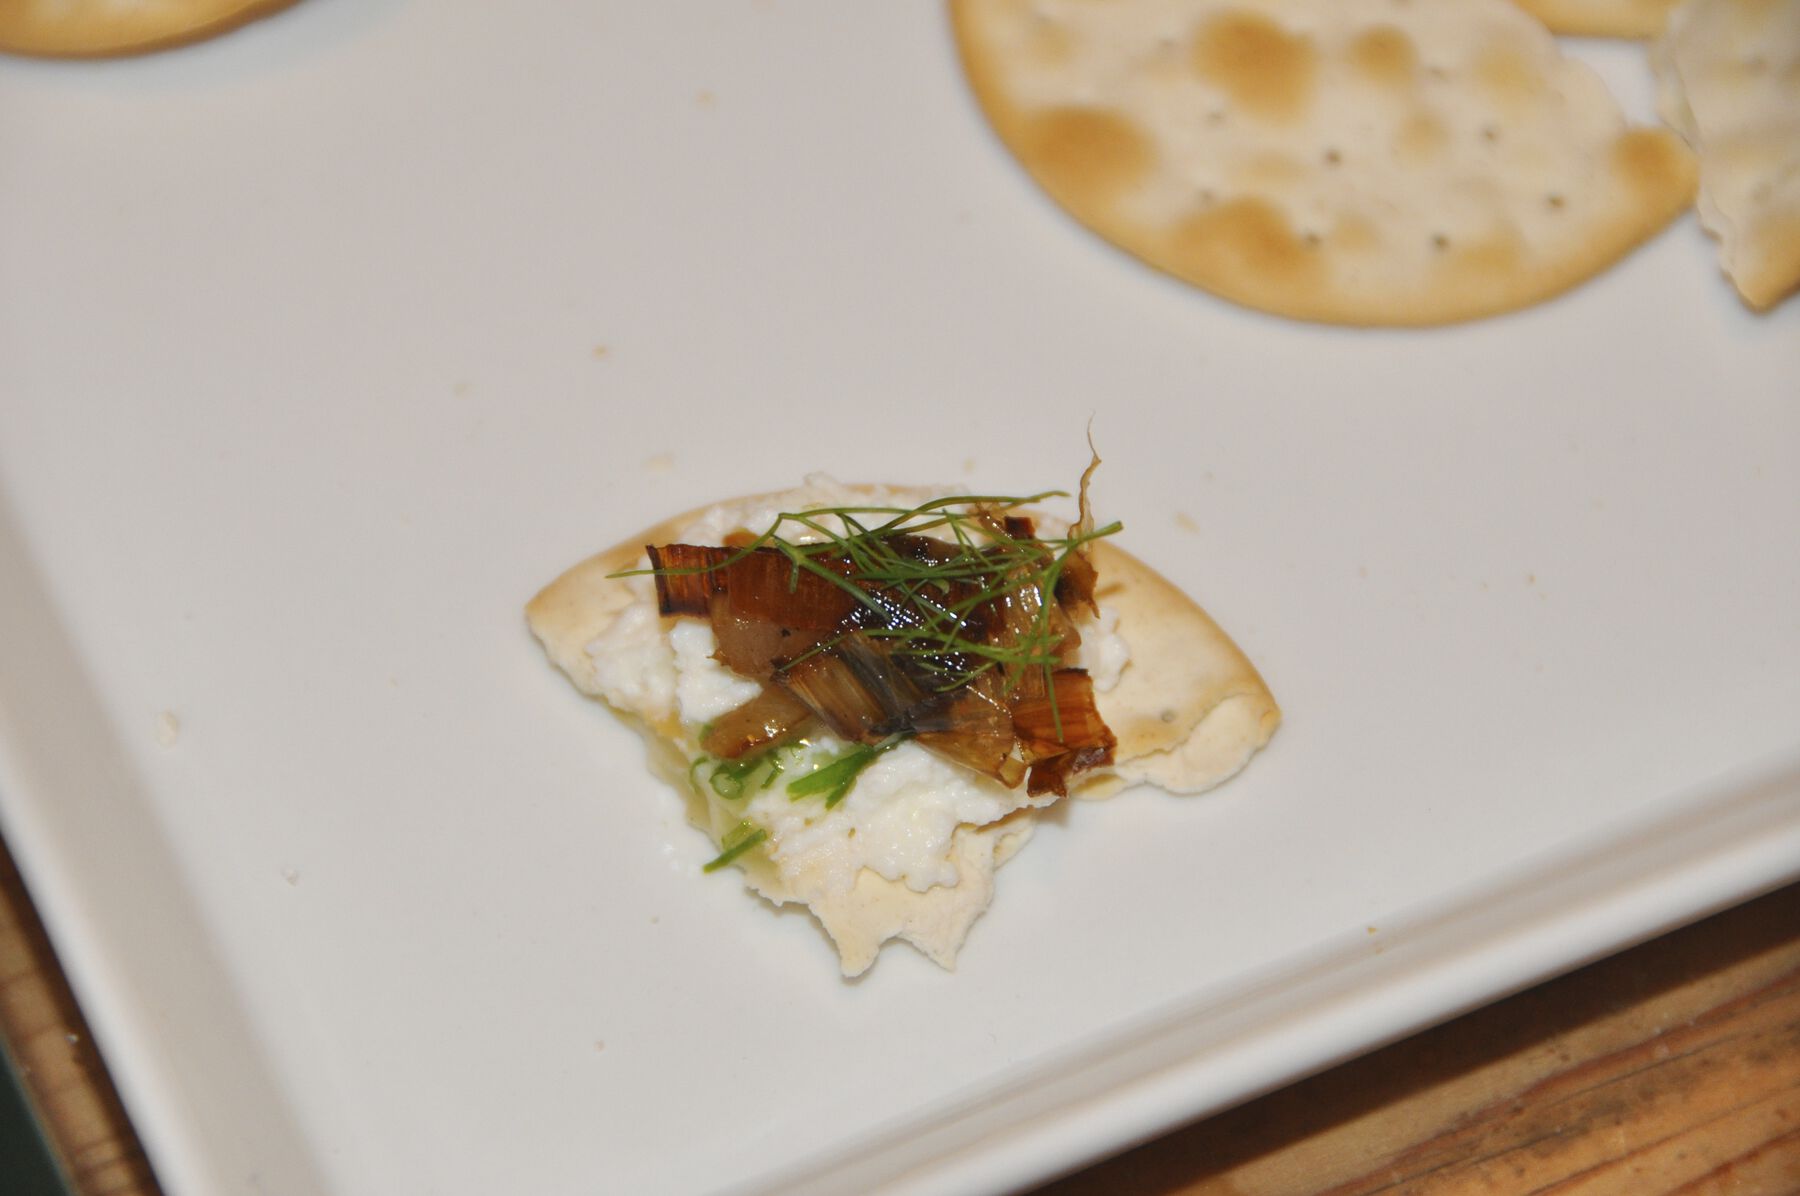 Red and green seasoning and white cream placed upon broken-off section of cracker in white tray